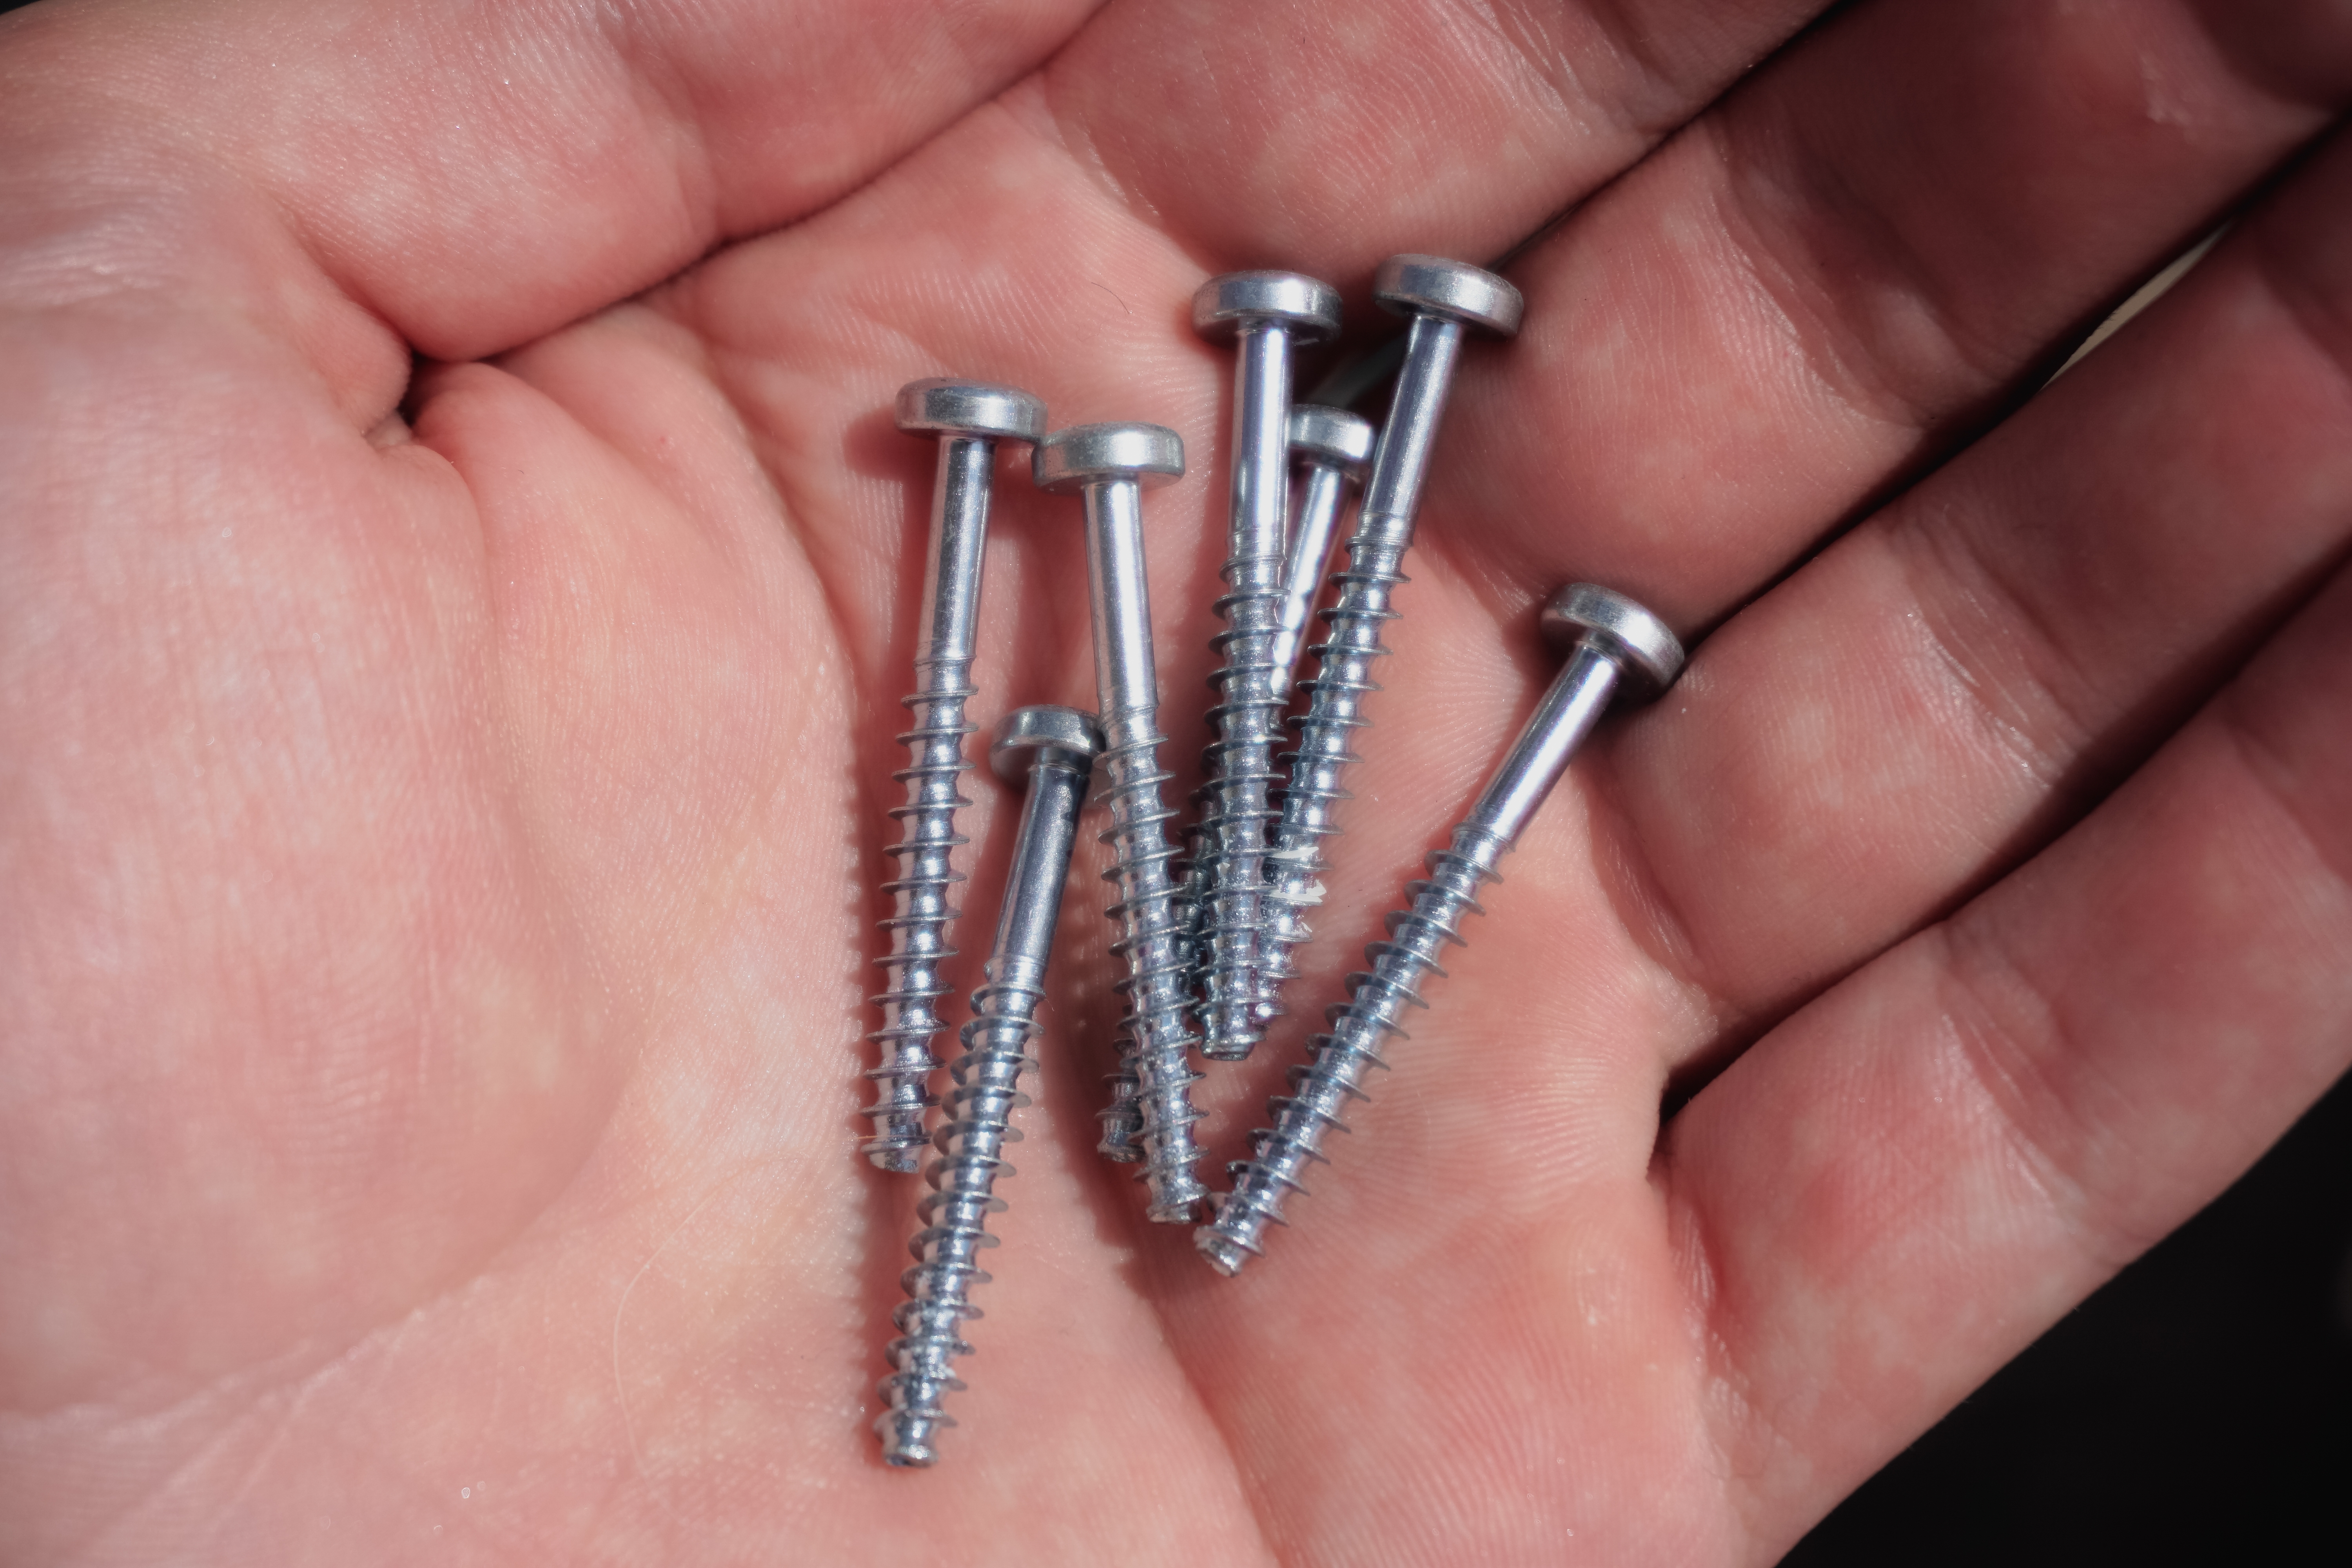 A person holding screws | Source: Shutterstock